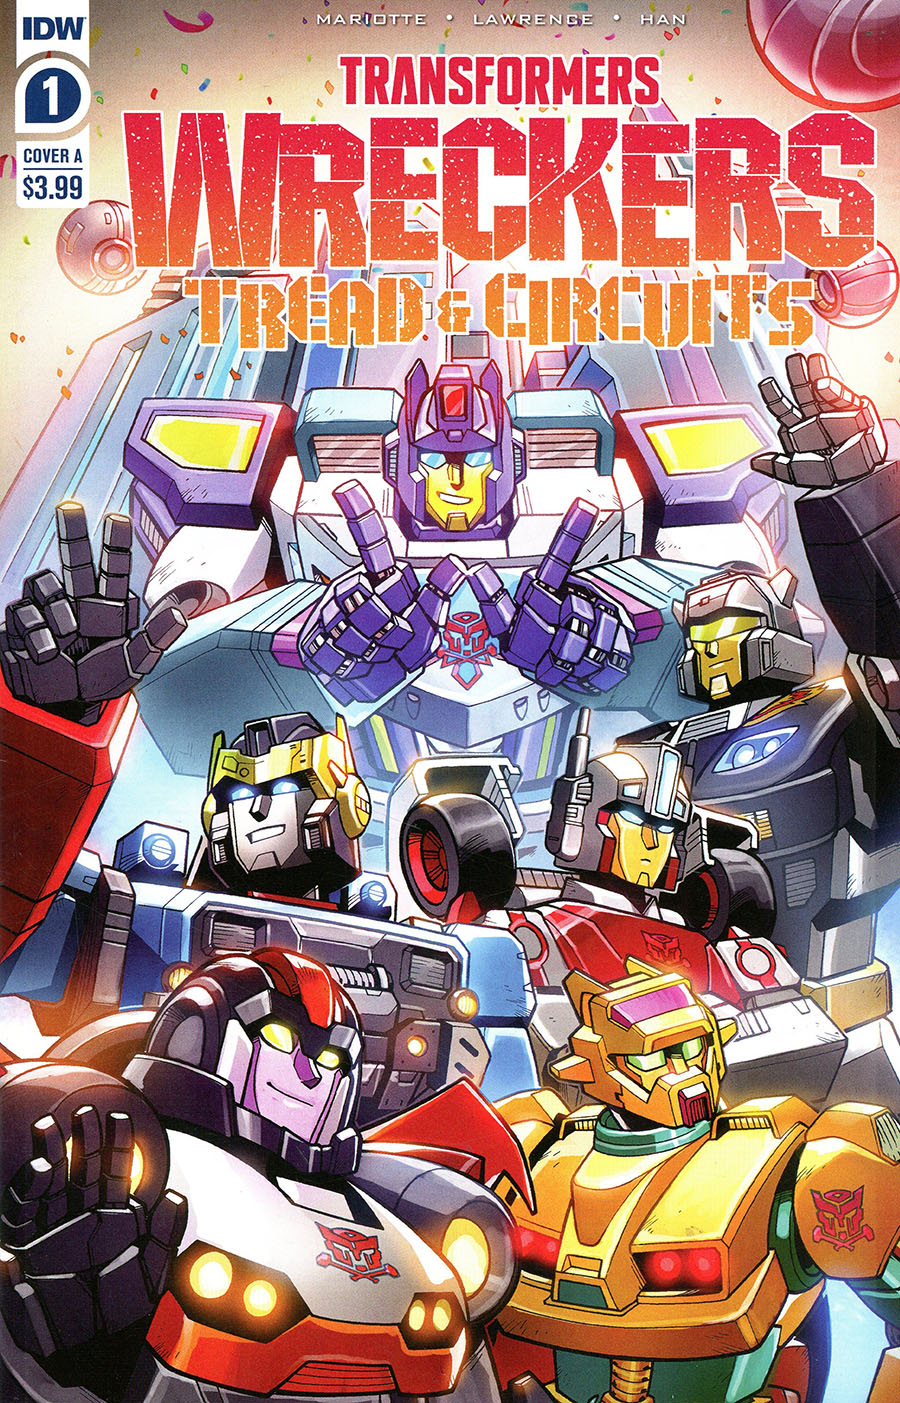 Transformers Wreckers Tread & Circuits #1 Cover A Regular Jack Lawrence Cover